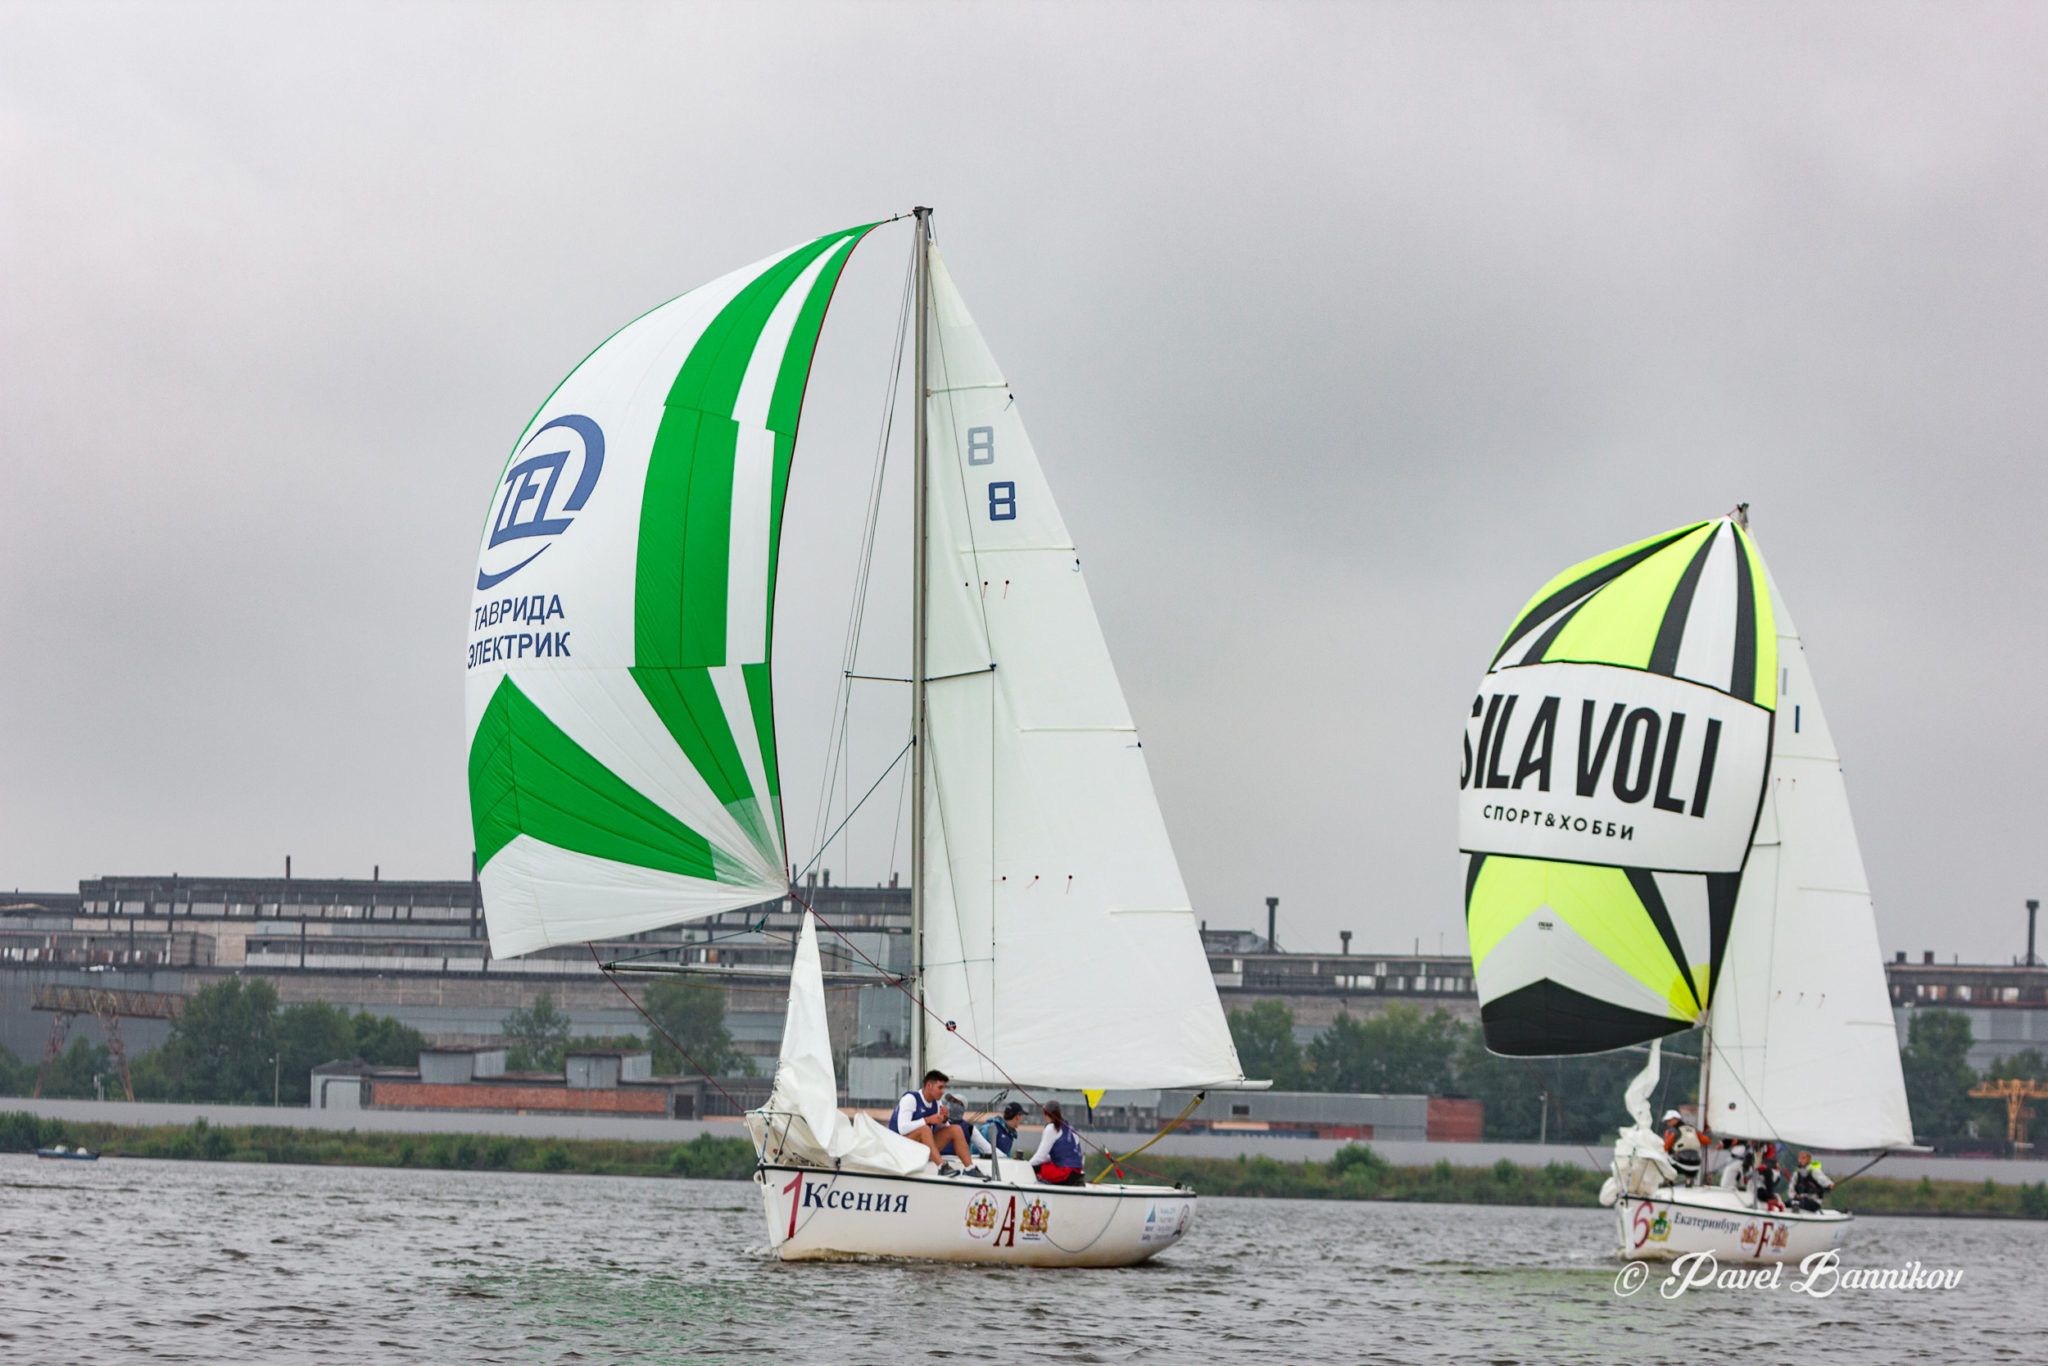  Match Racing  Youth World Championship 2019  Ekaterinburg RUS  no wind for Finals, Grimes AUS Champion, Parkin USA 5th